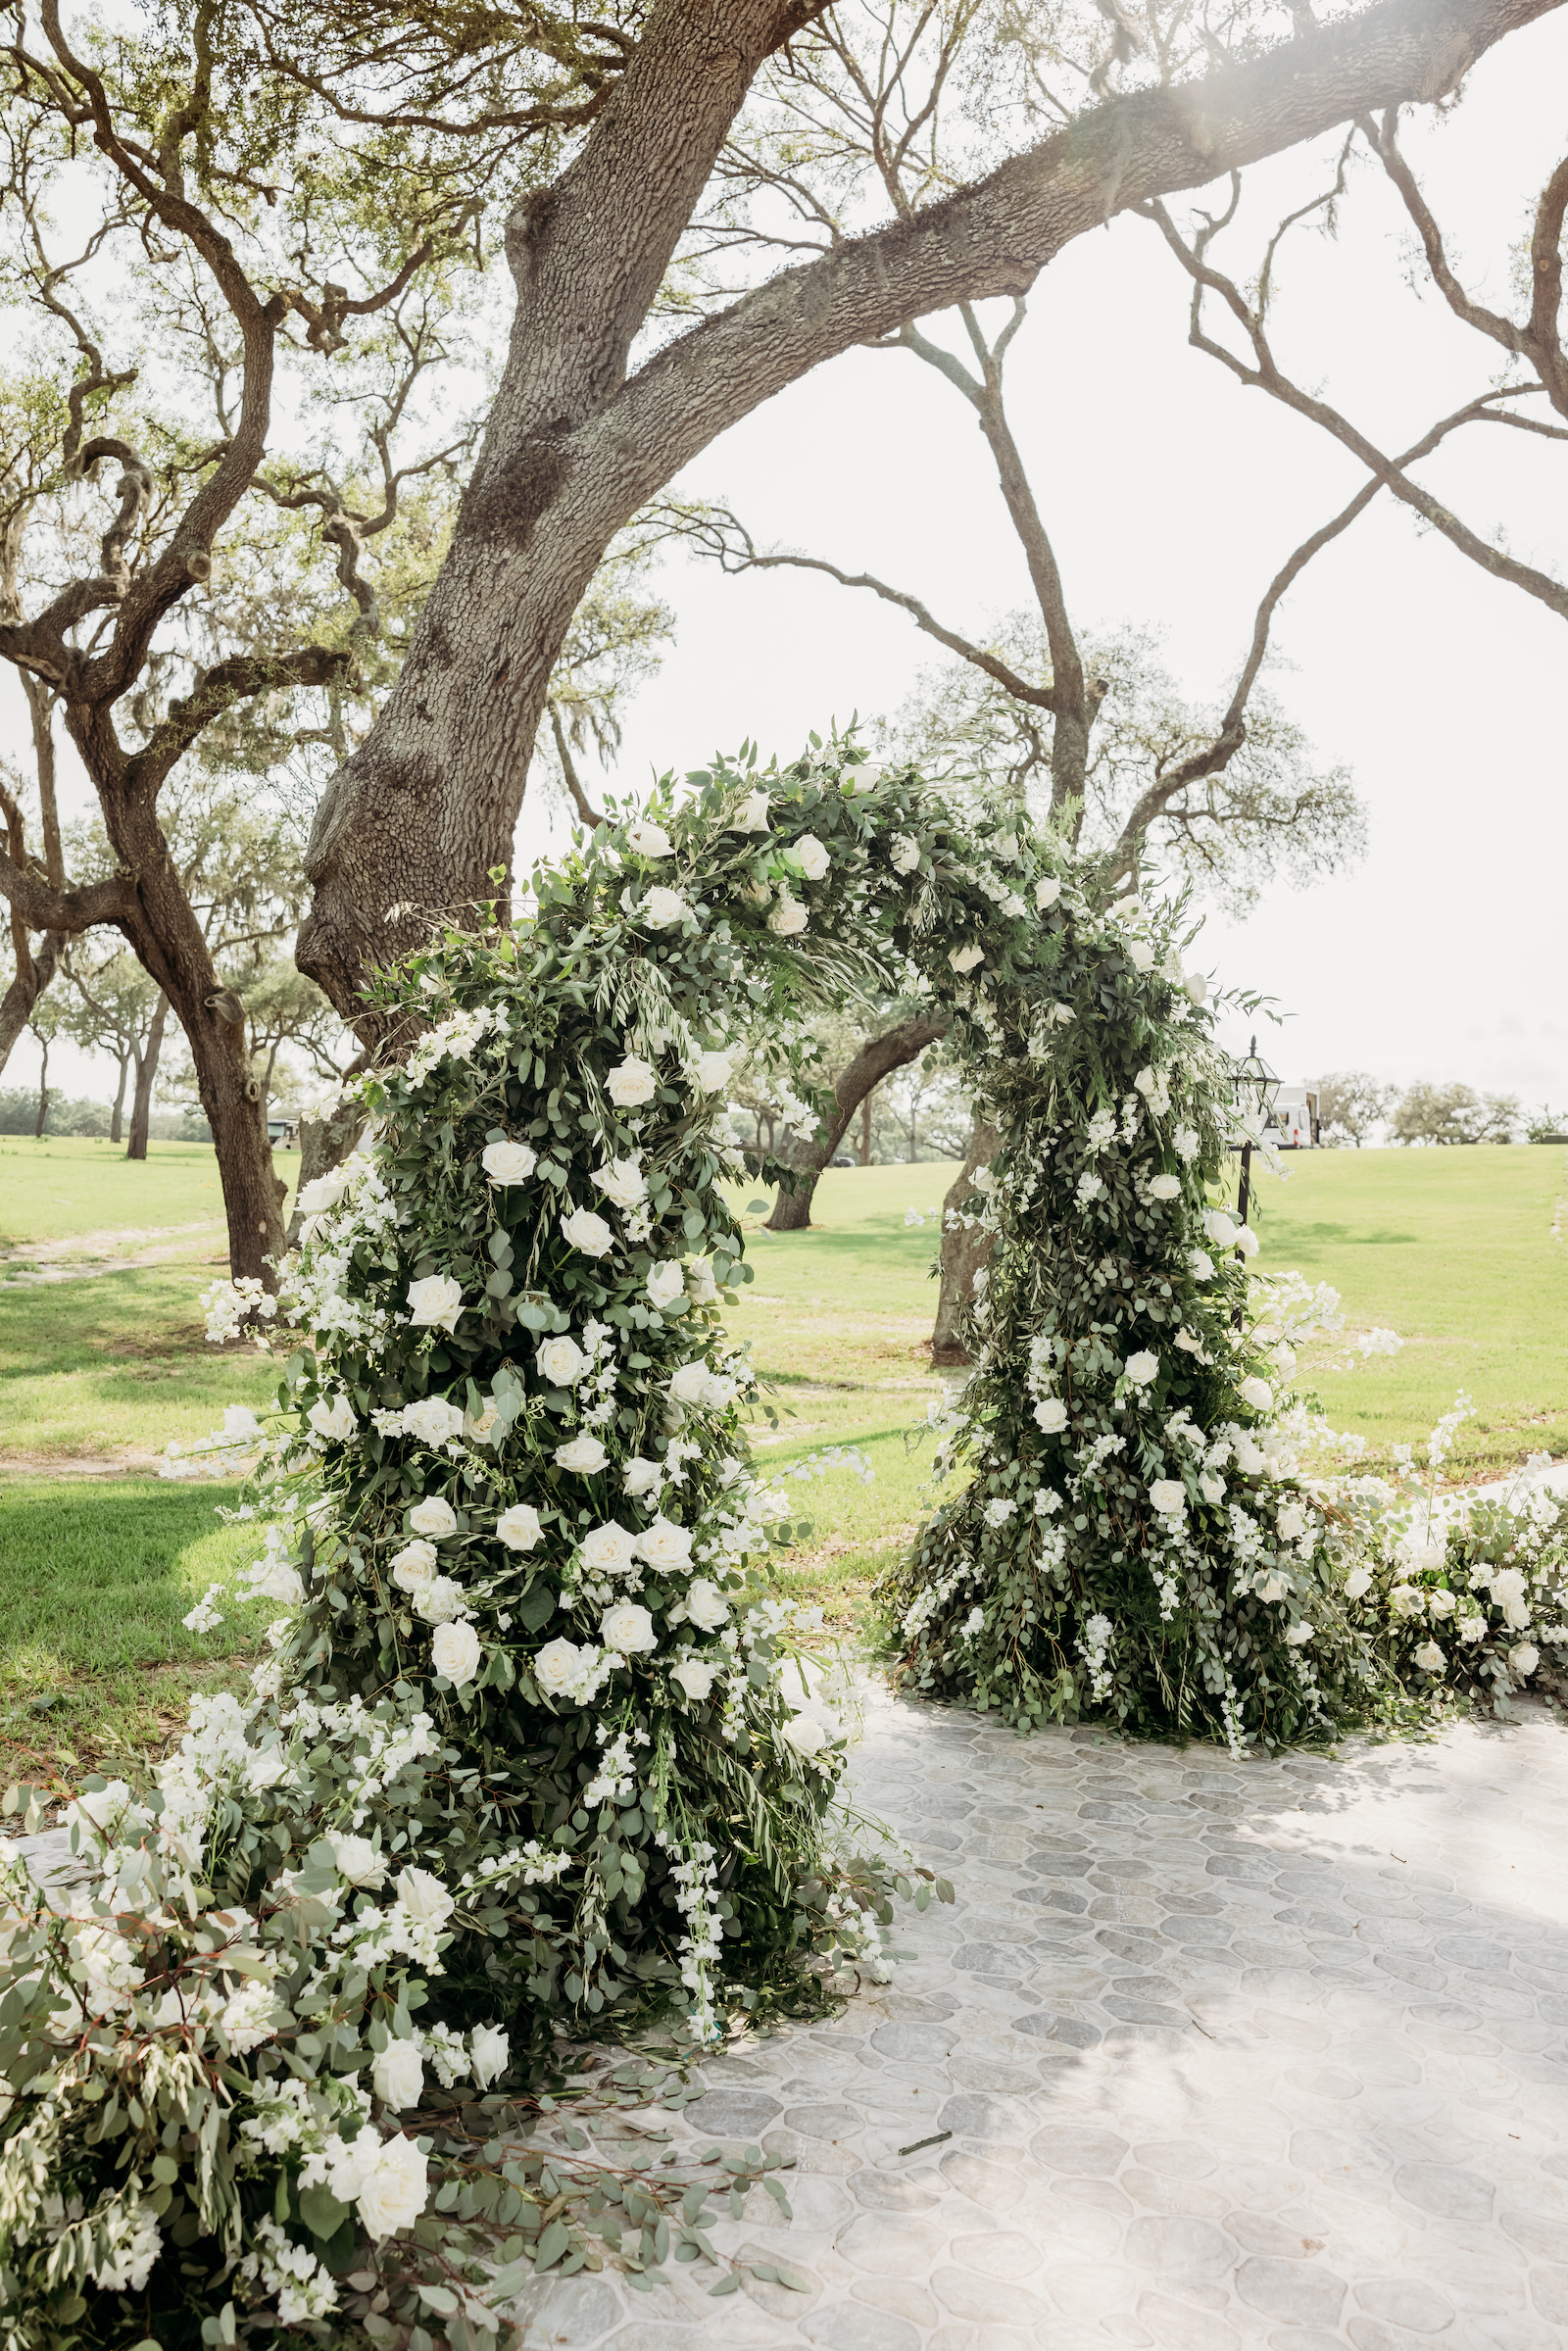 Classic Tampa Wedding Ceremony Decor, Lush Greenery and White Floral Arch